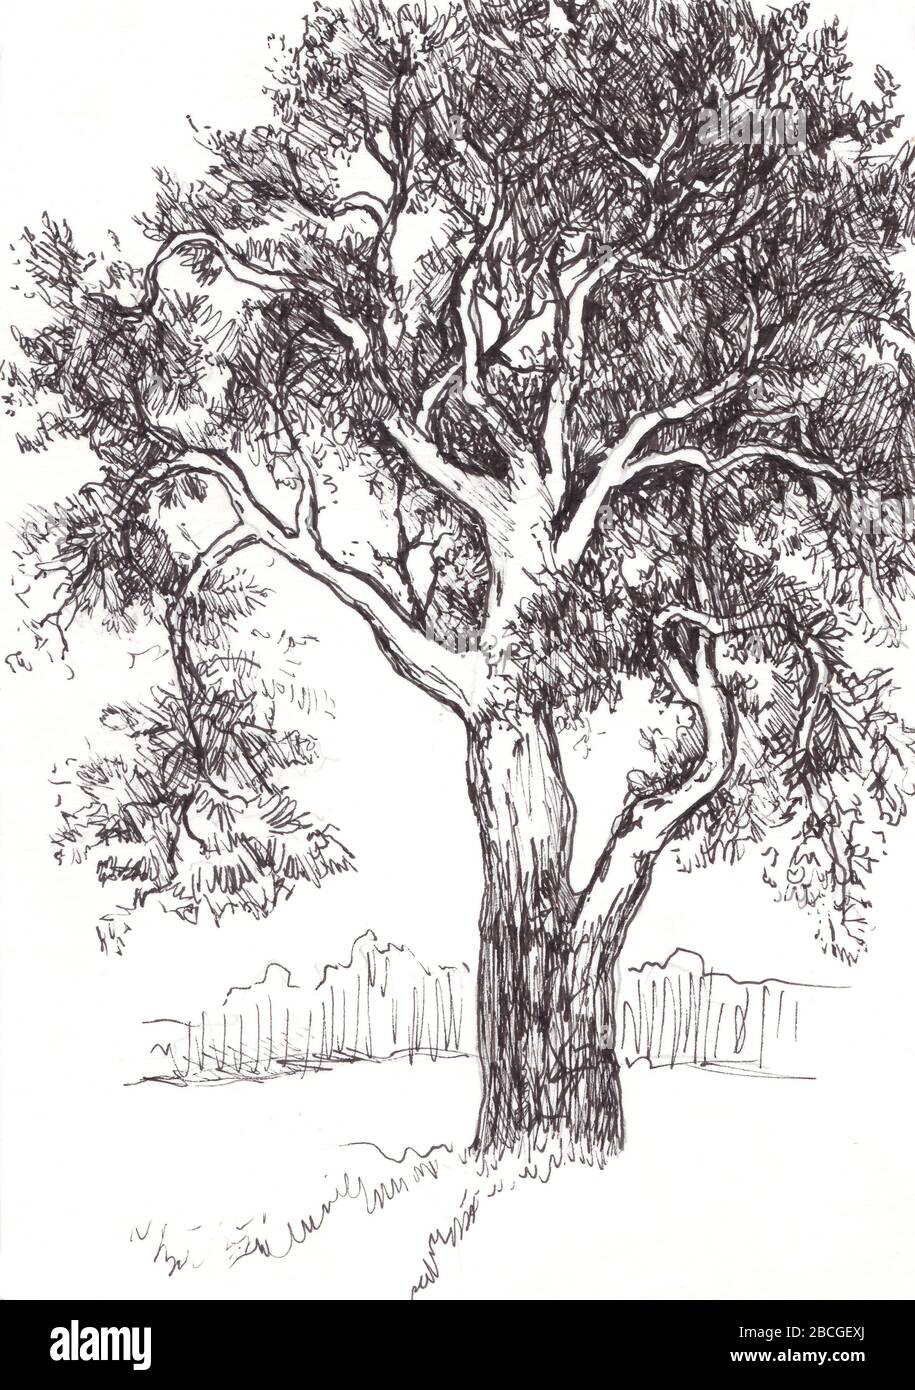 Ink sketch of pine and tree on white background Stock Photo